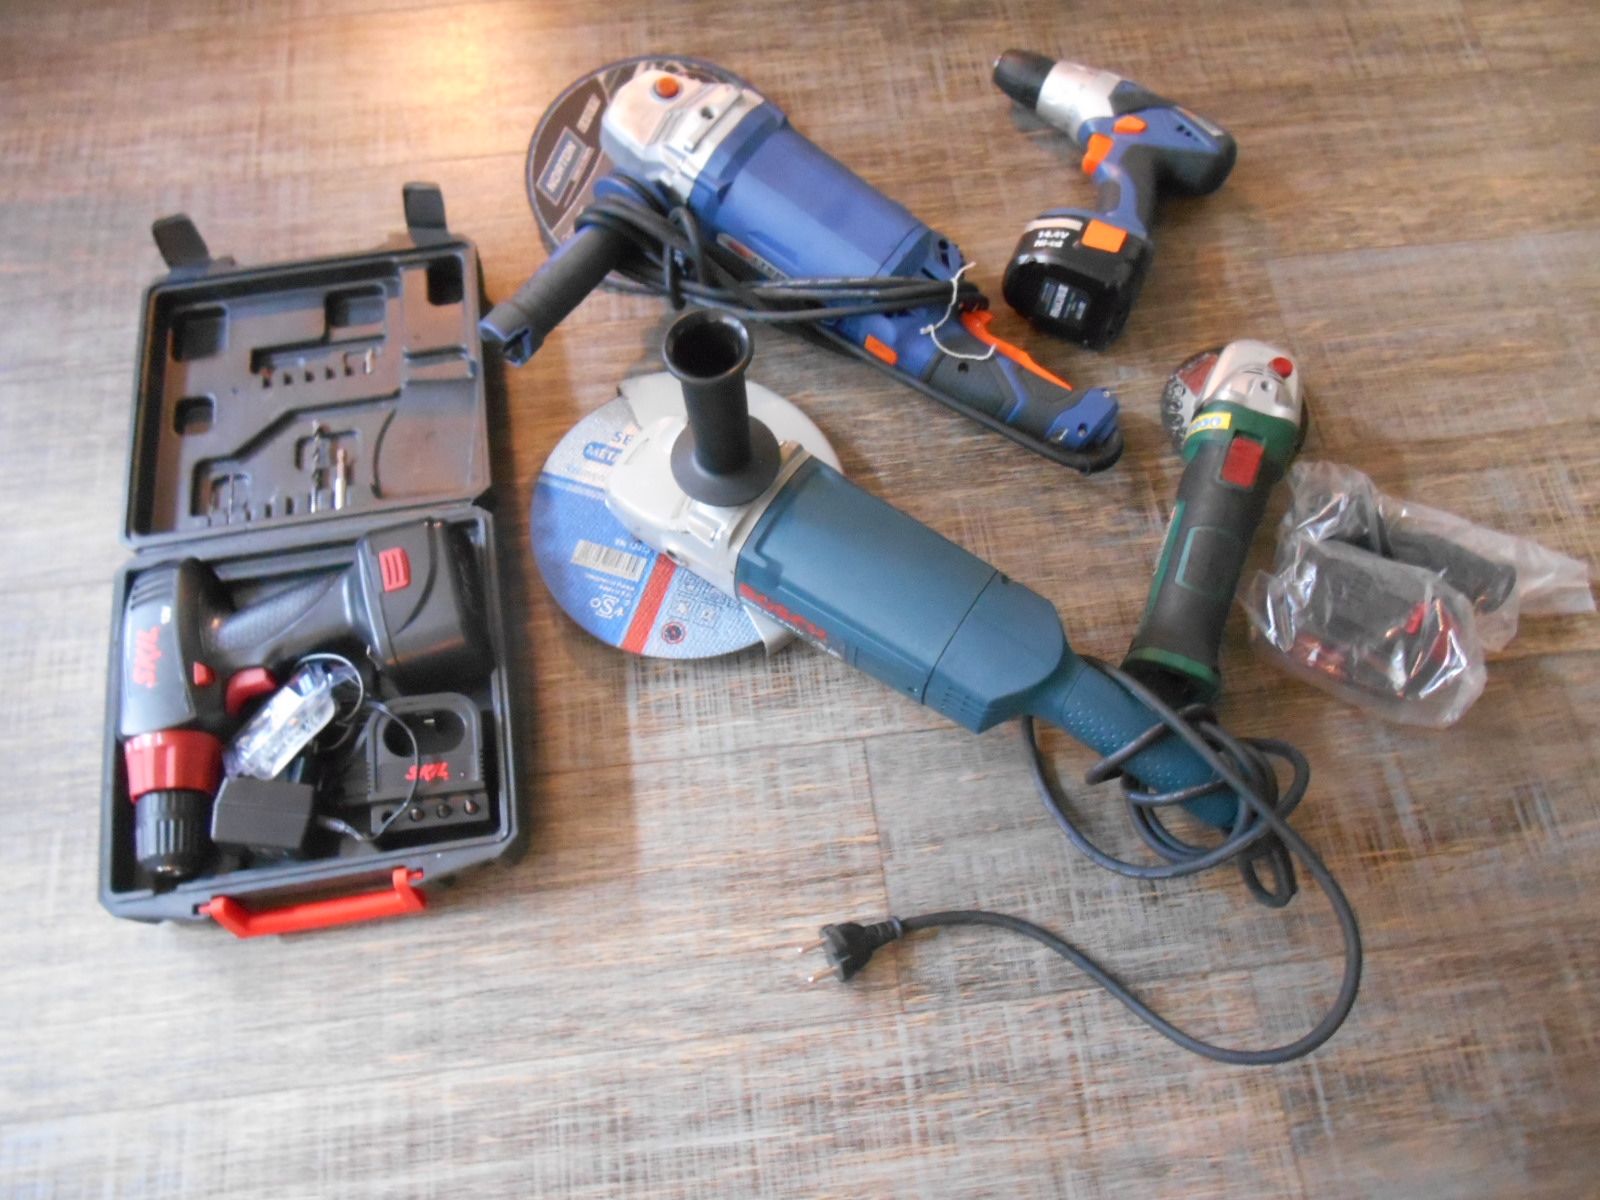 Null Set of tools in used condition including:
- BOSCH corded grinder, model GWS&hellip;